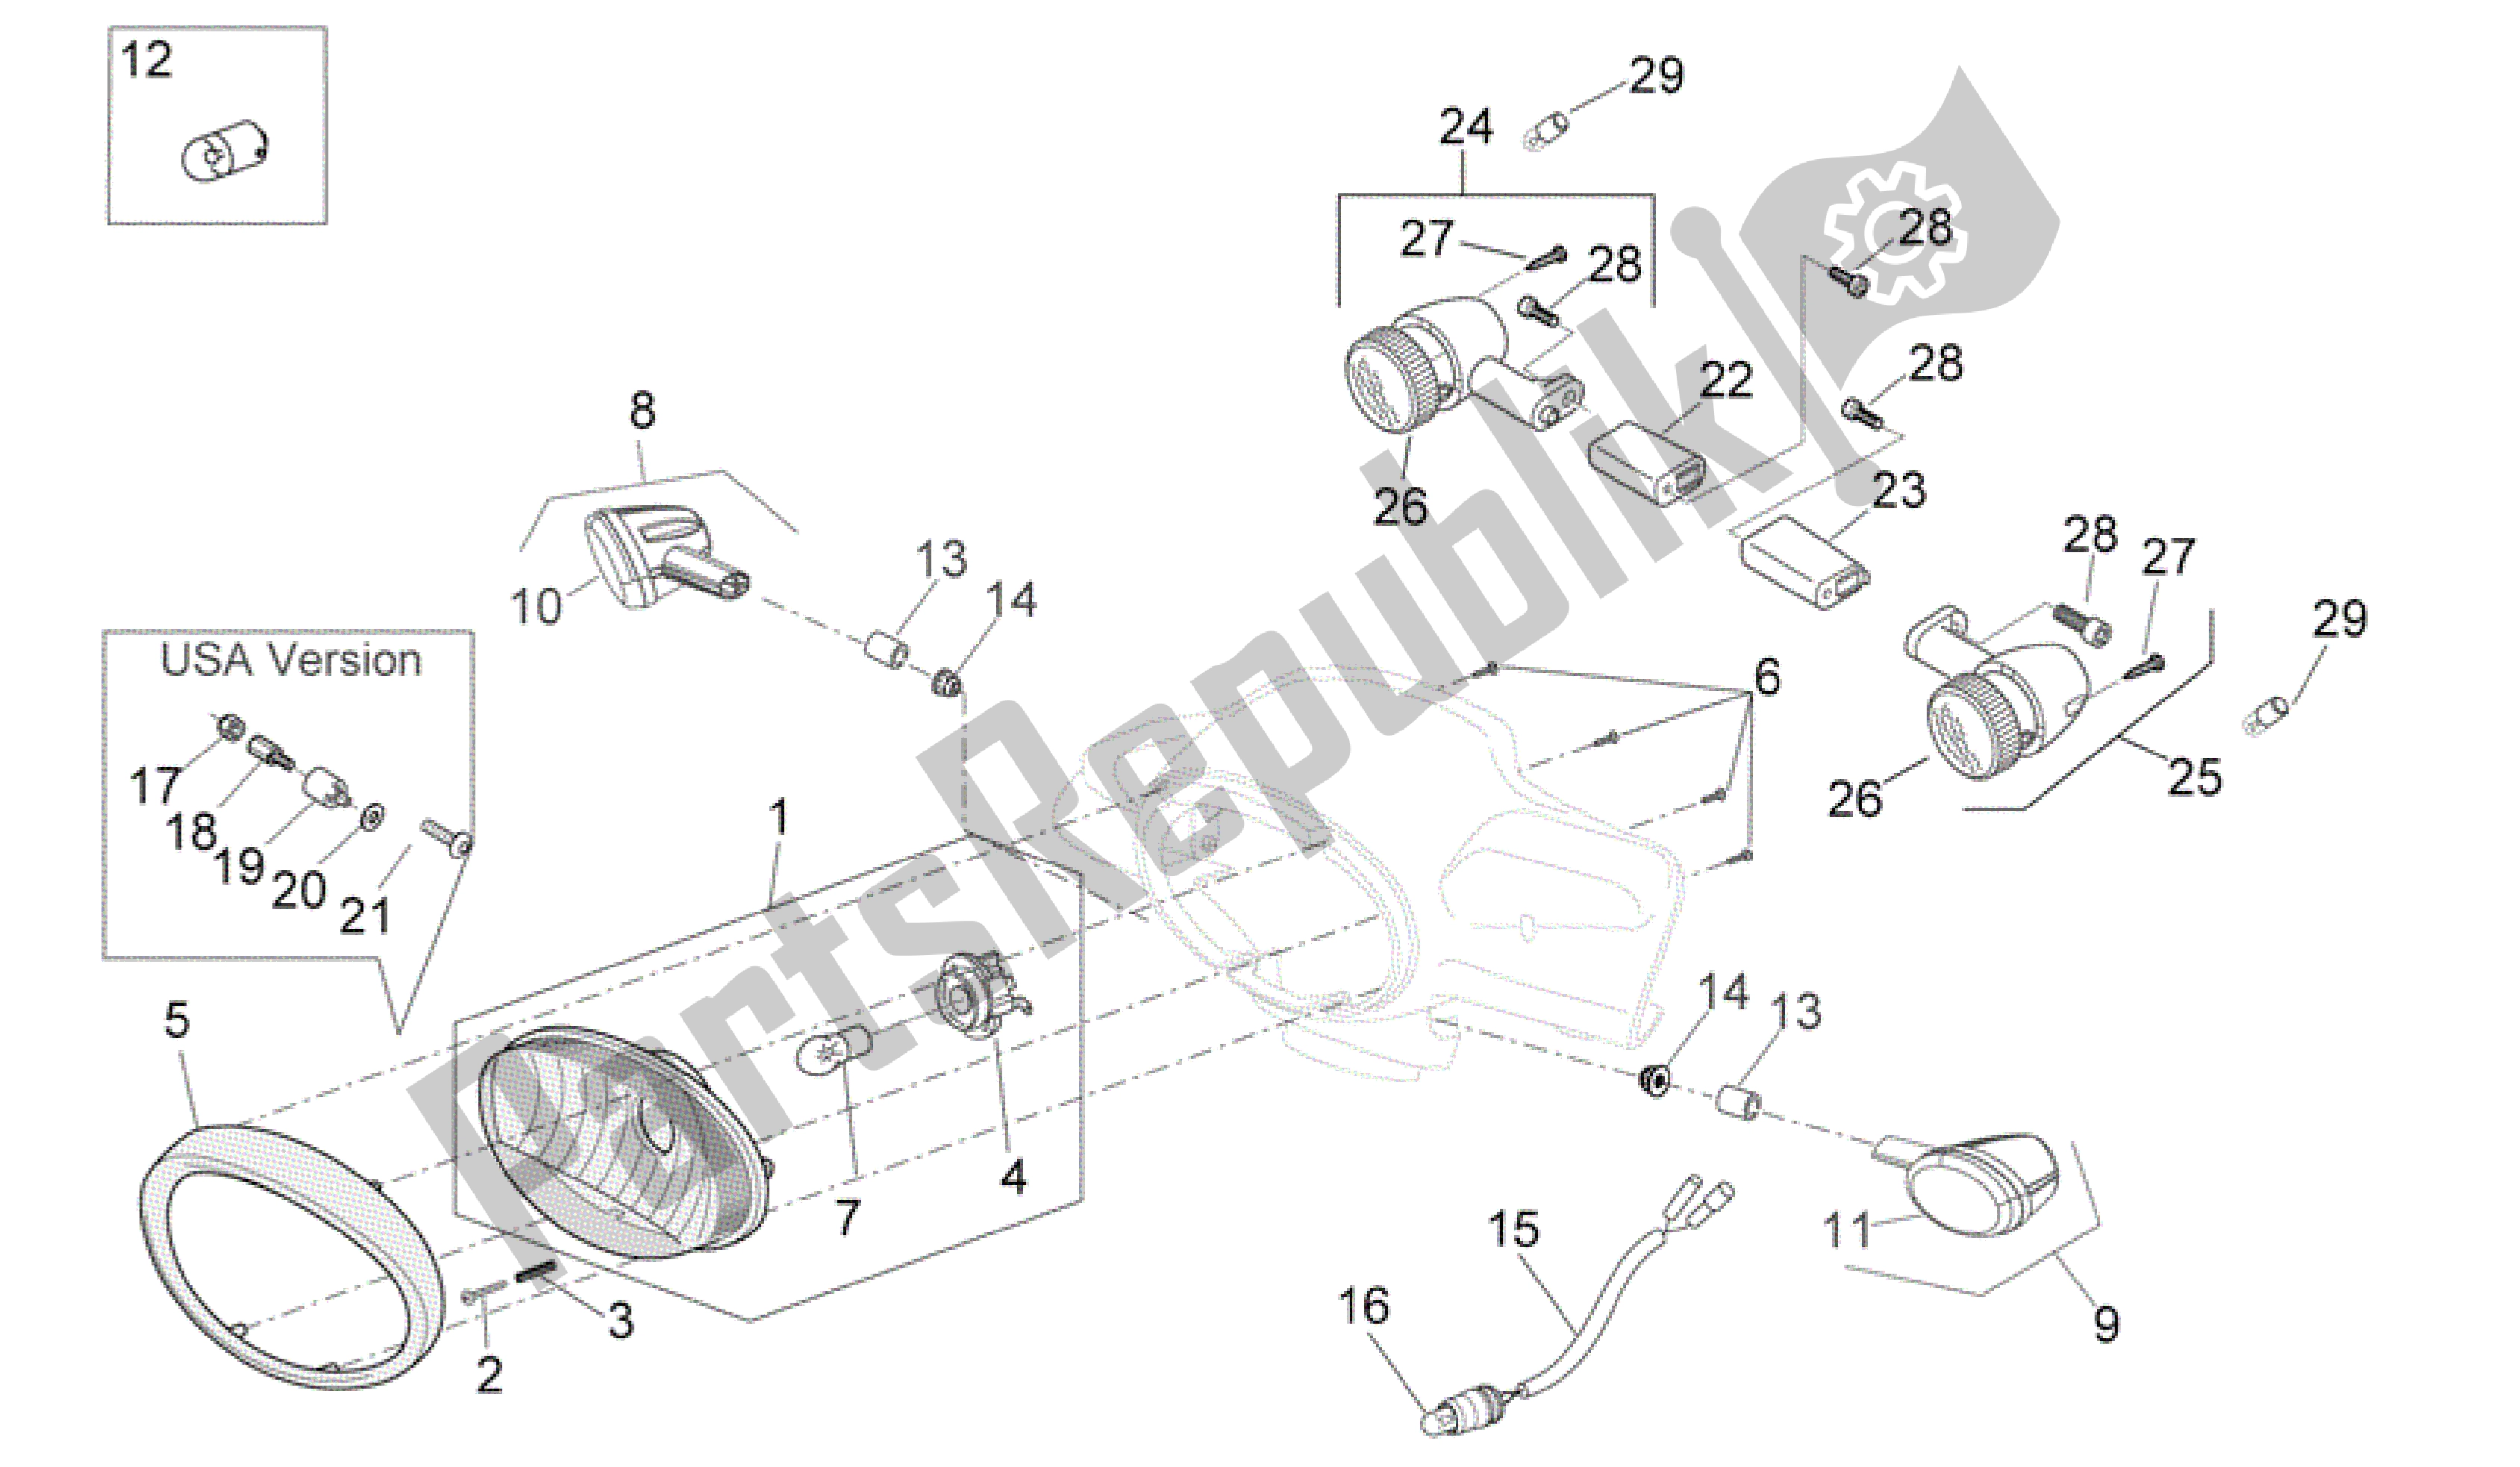 All parts for the Front Lights of the Aprilia Scarabeo 100 2006 - 2009